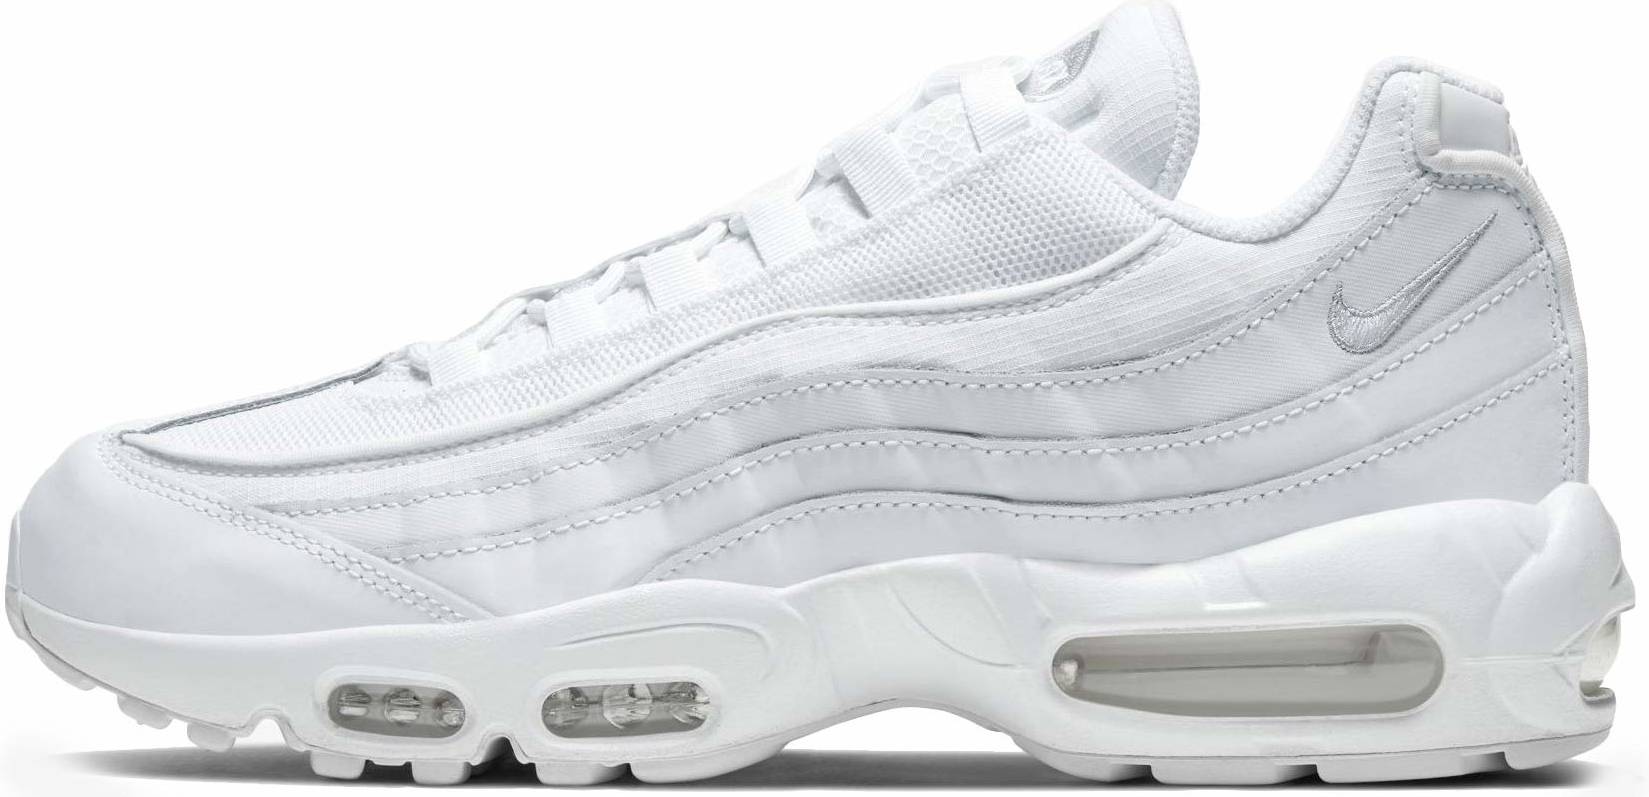 Nike Air Max 95 Essential sneakers in 20+ colors (only $130 